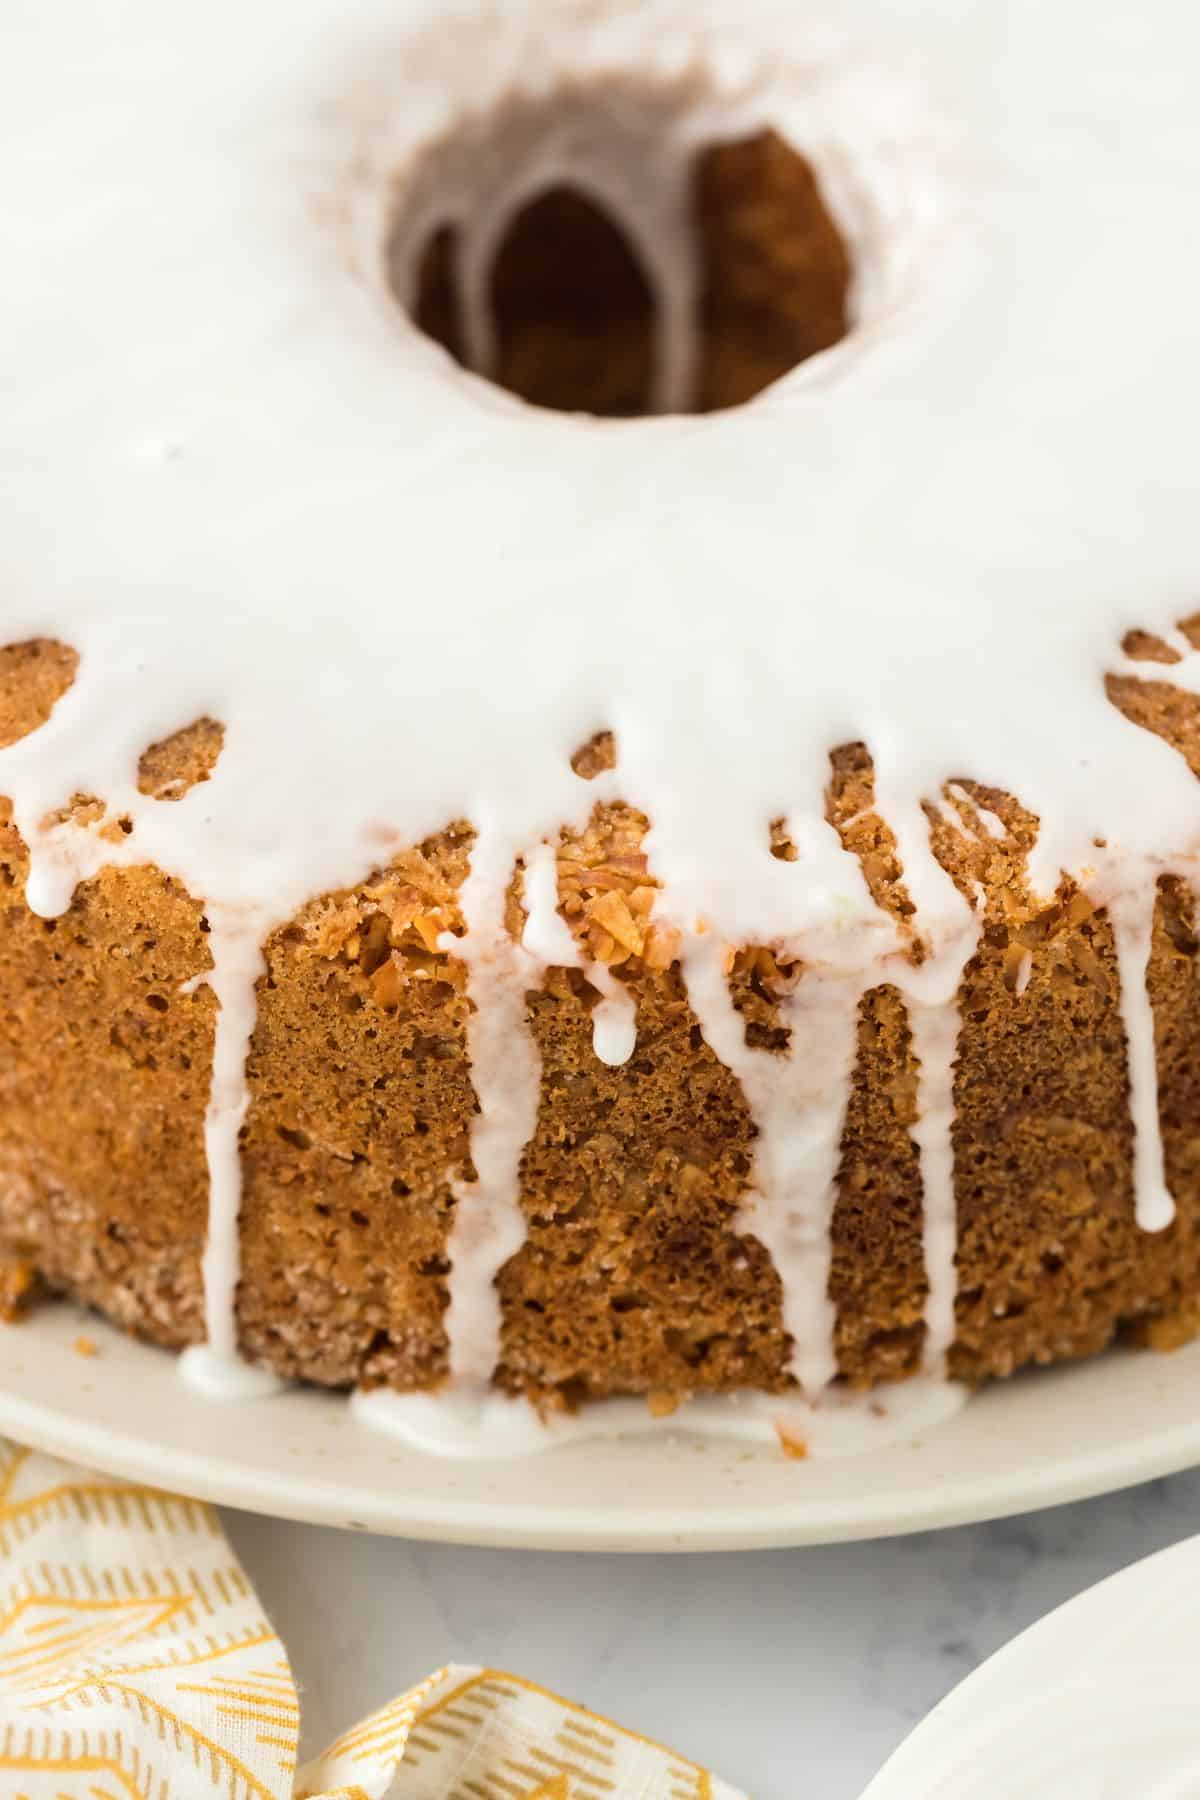 Closeup of Louisiana Crunch Cake on a white plate showing the white glaze dripping down the sides